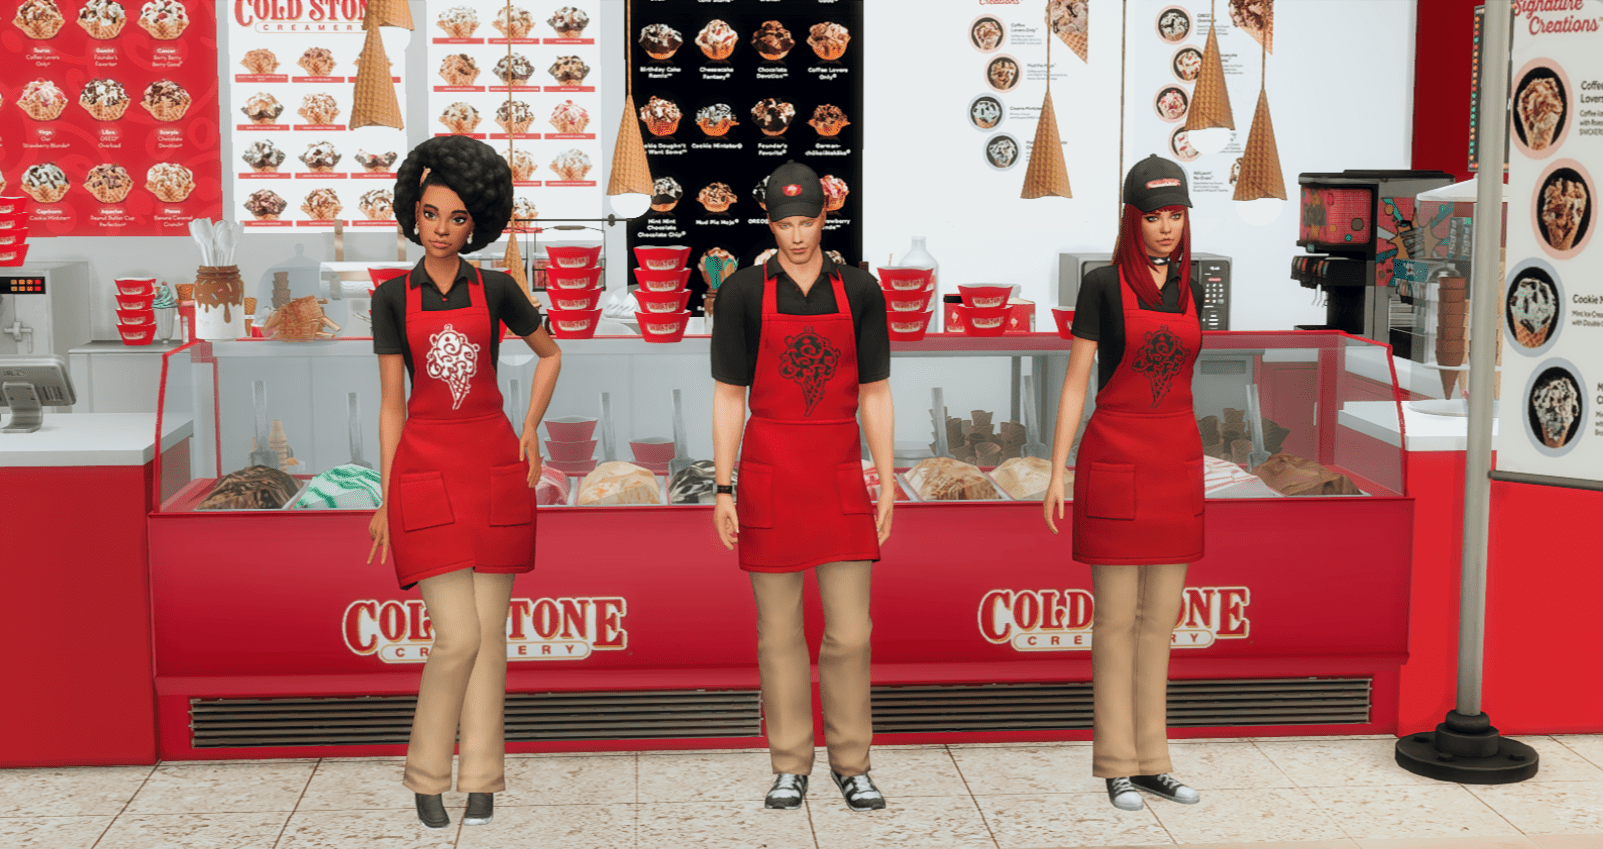 Cold Stone Creamery Uniform and Hat [MM]